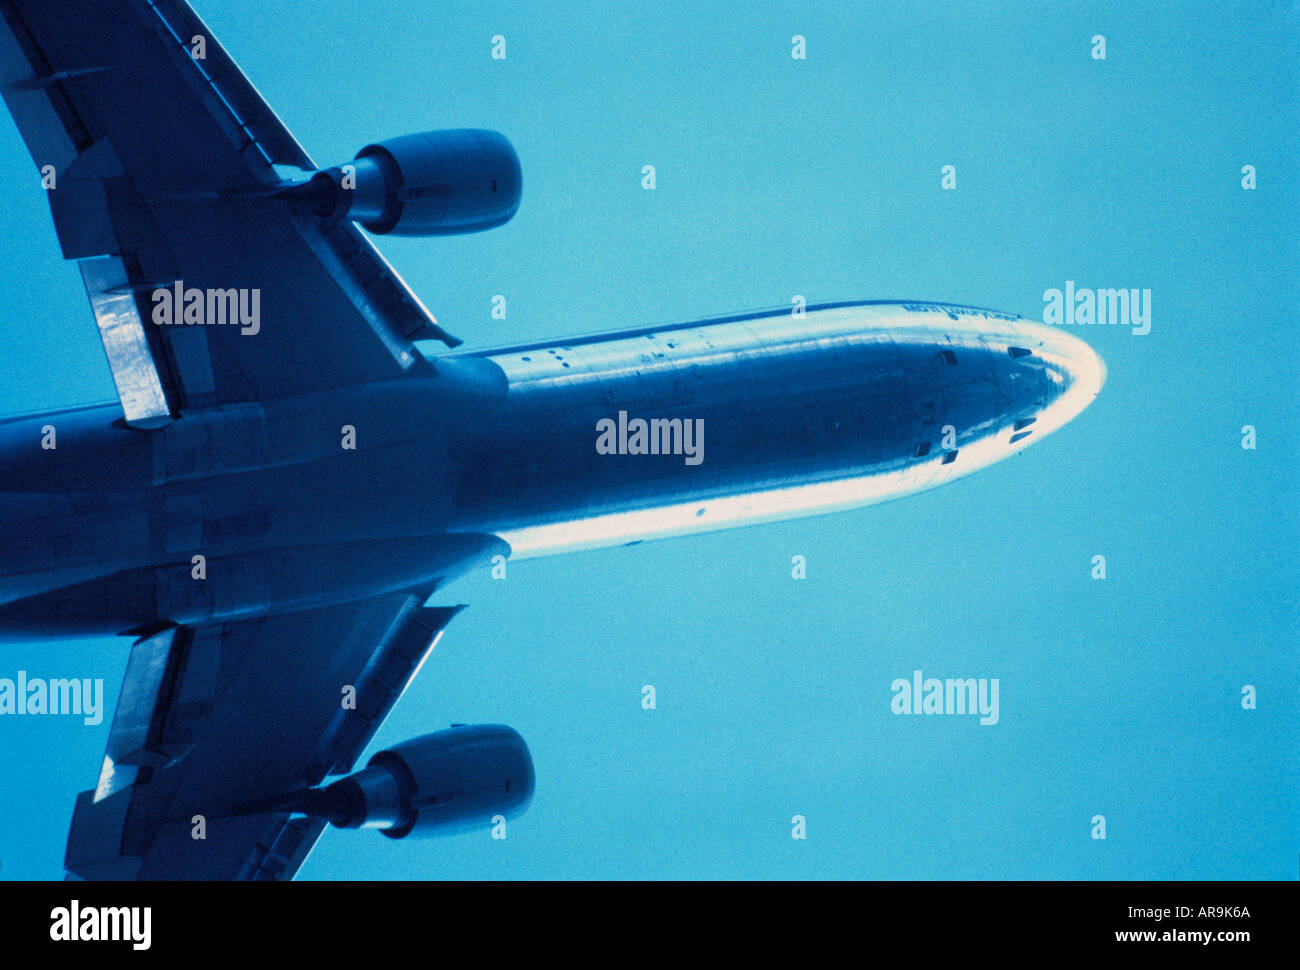 Boeing MD-11 jumbo jet airliner blue sky at cruising altitude aero engines wings Stock Photo